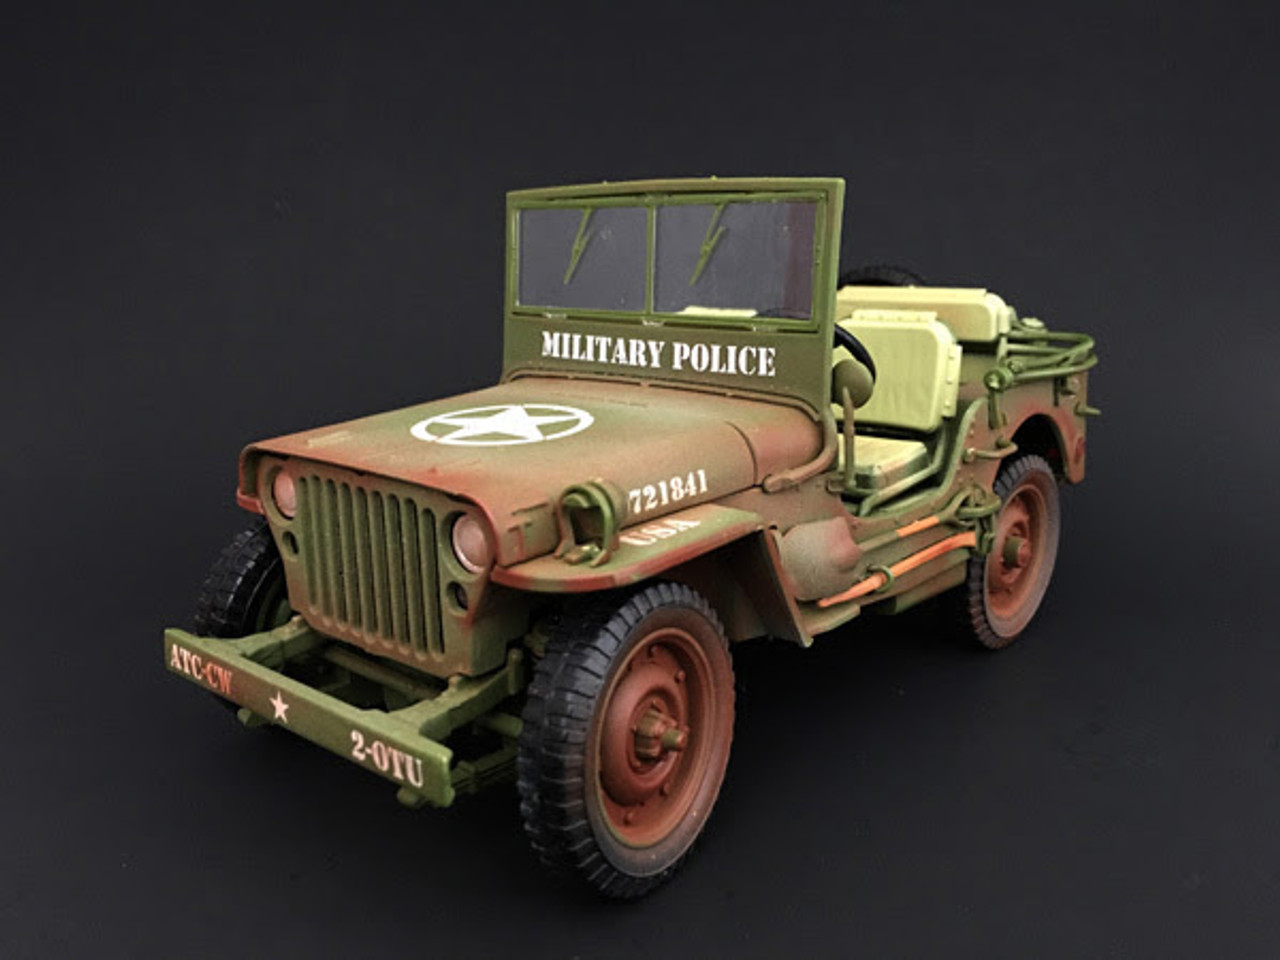 US Army Vehicle WWII "Military Police" Green Weathered Version 1/18 Diecast Model Car by American Diorama